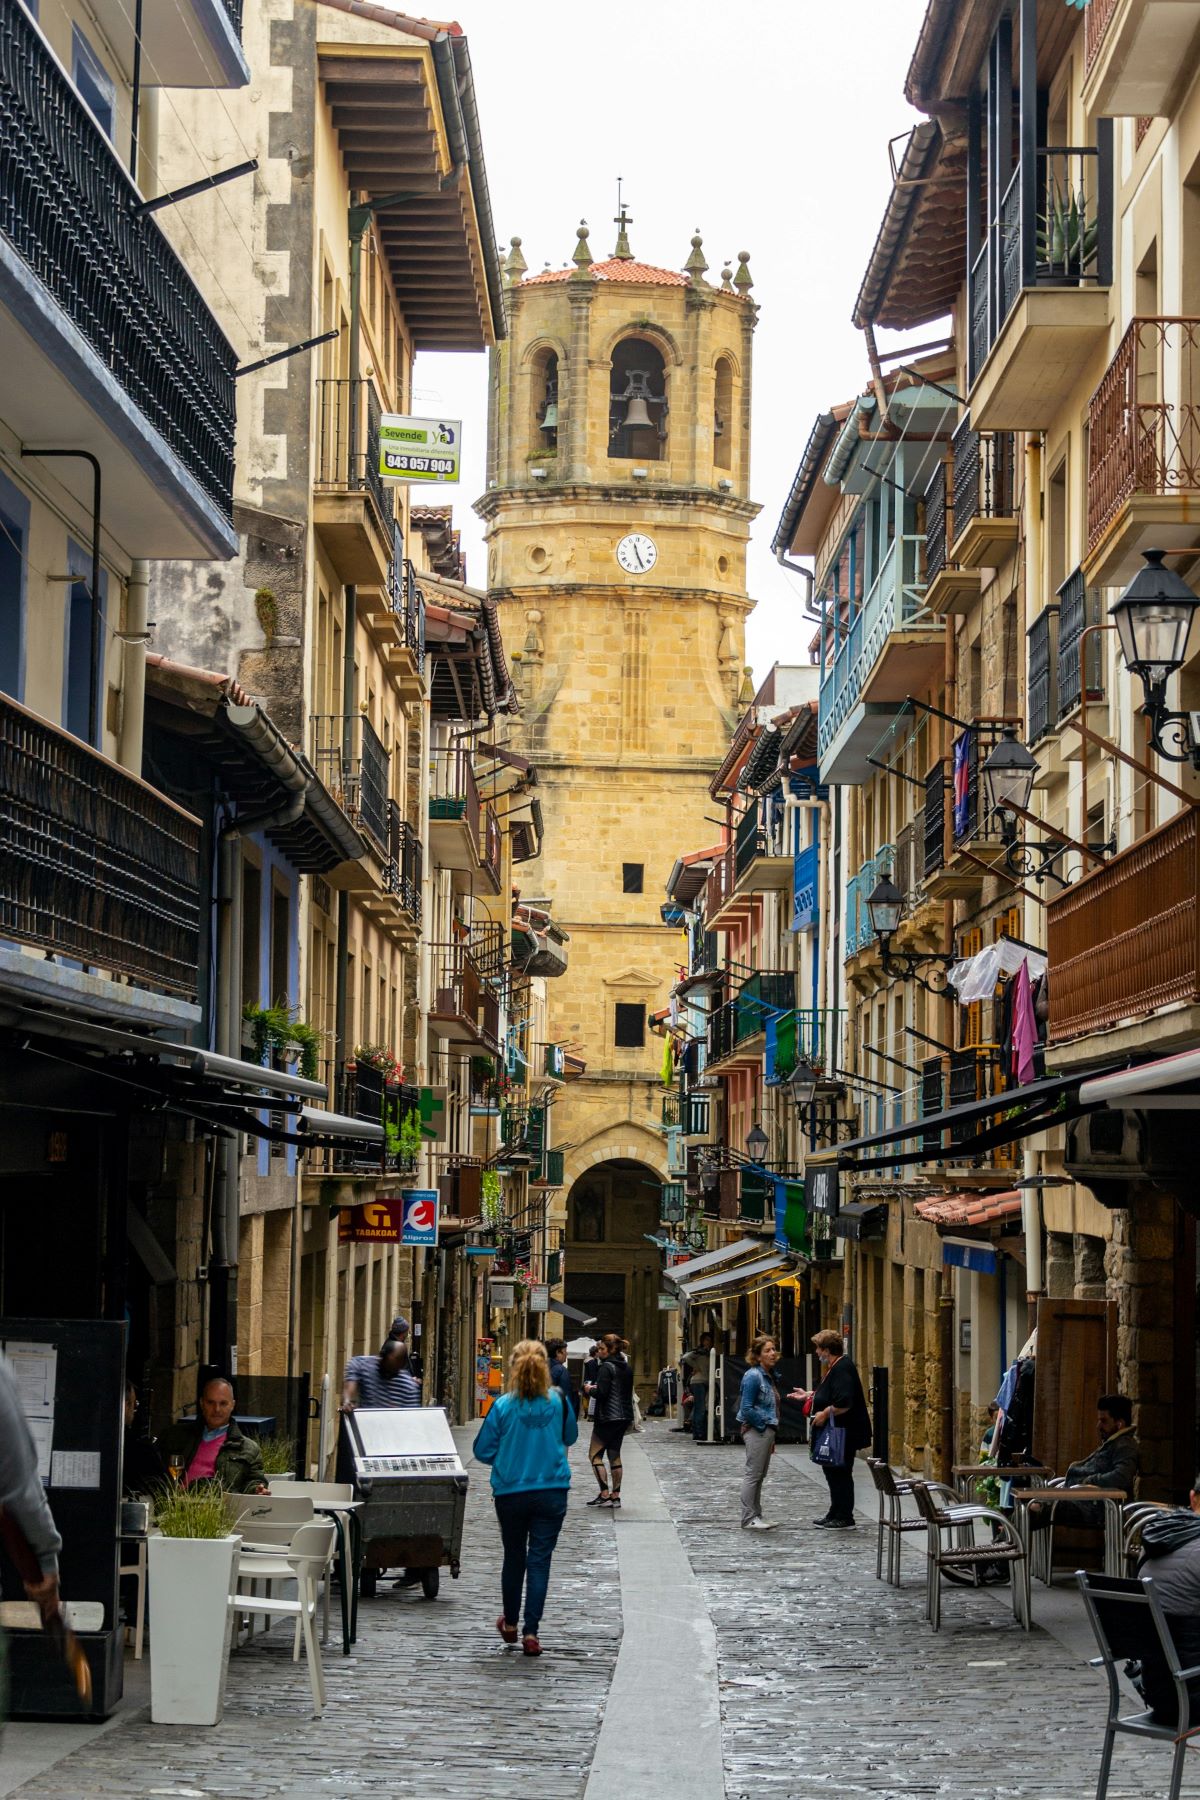 A group of people walking down a narrow street in Getaria, Spain near a church tower. 